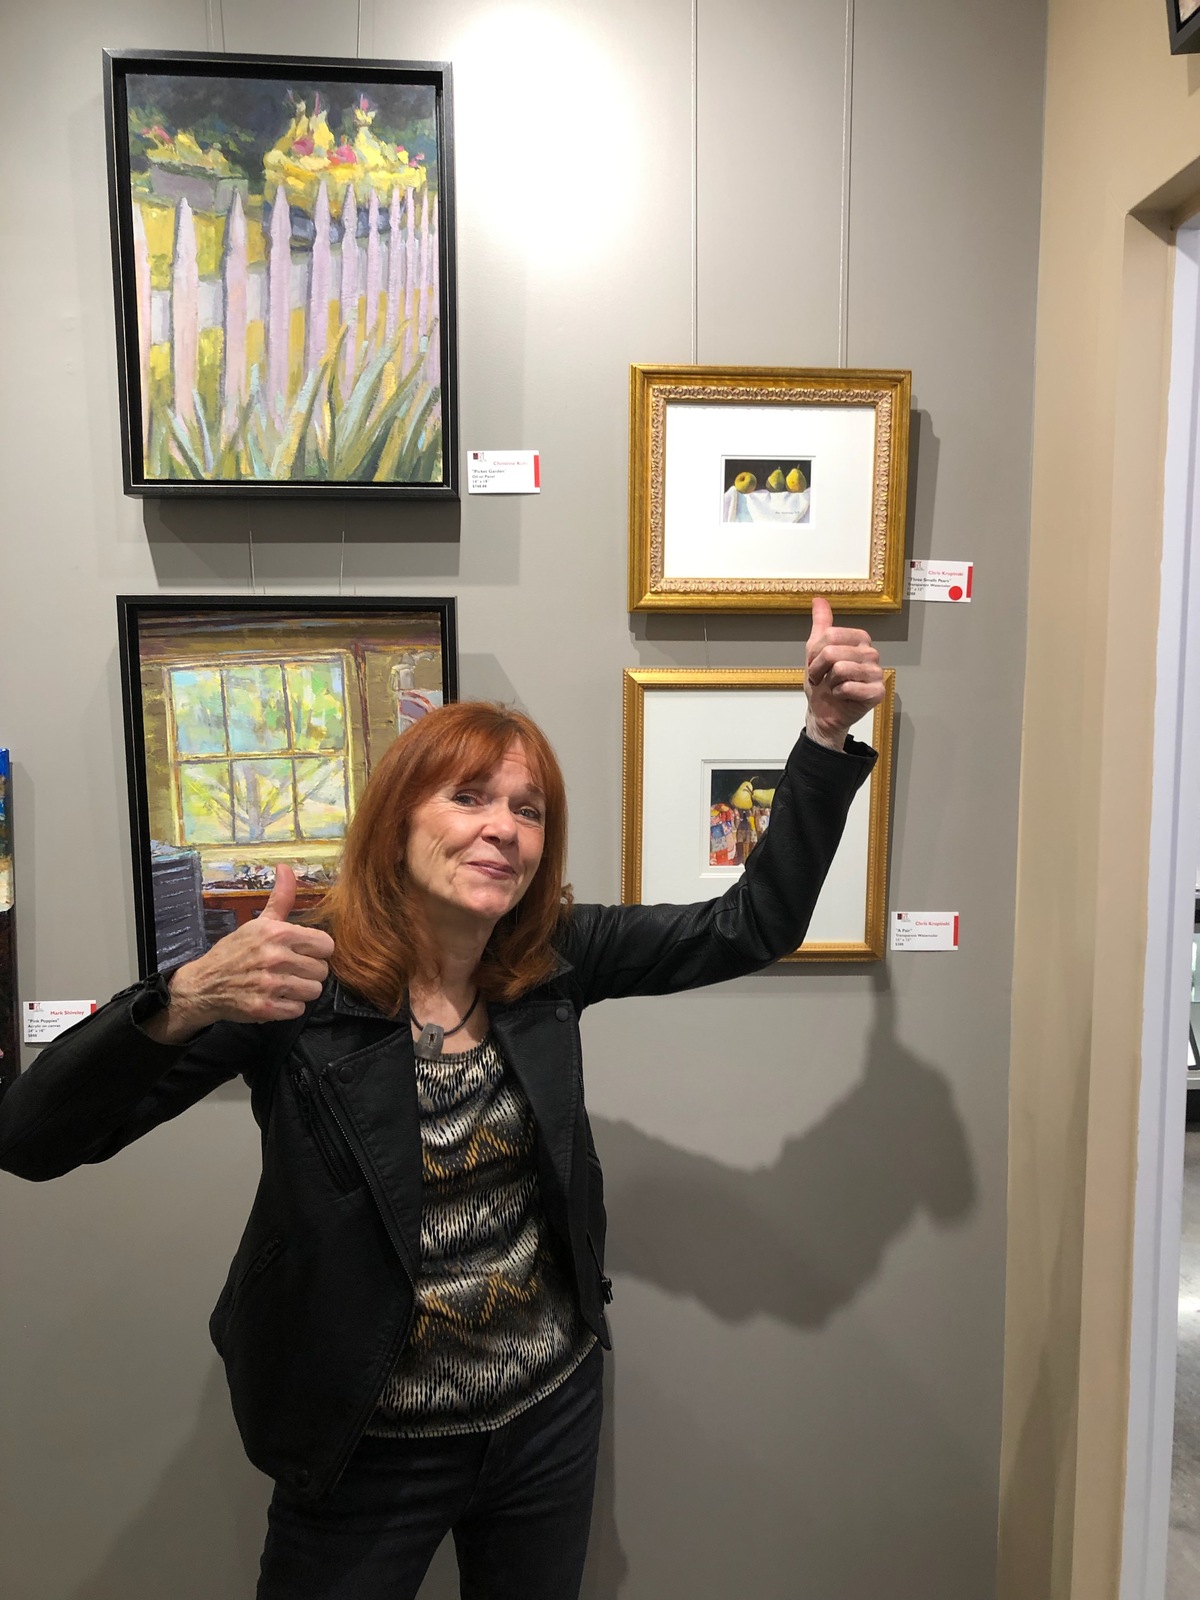 Chris Krupinski in front of her sold watercolor painting